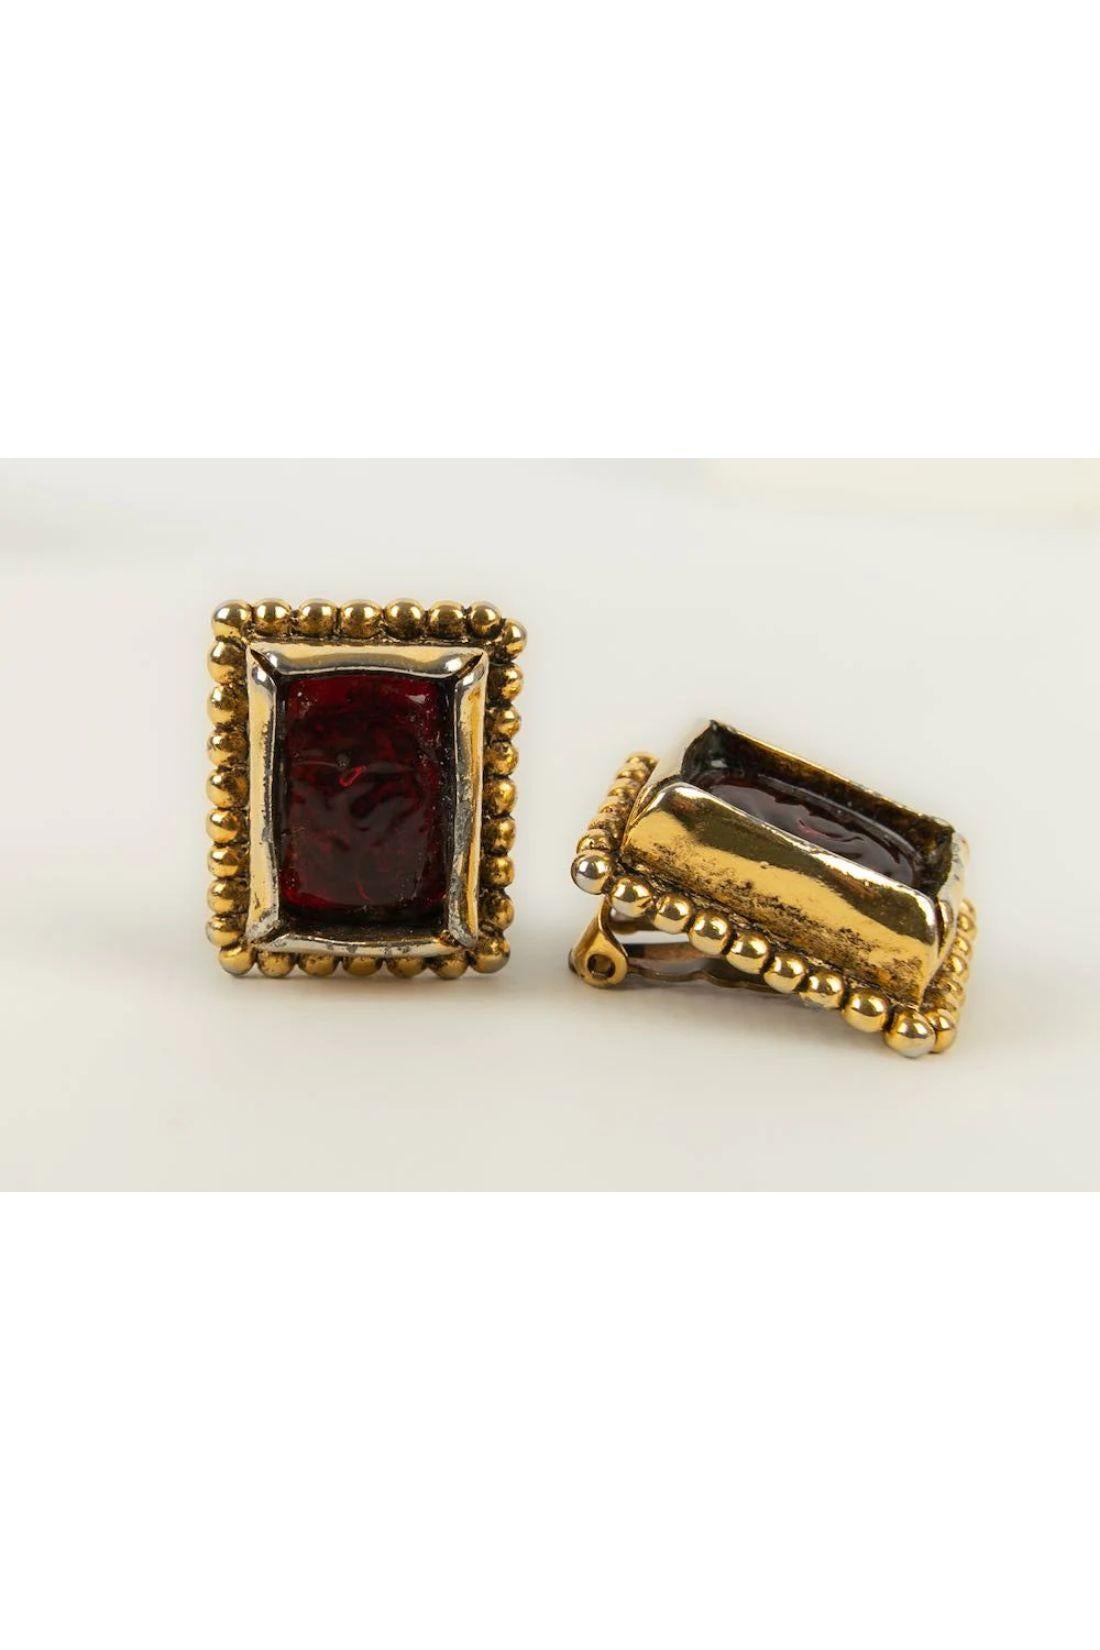 Chanel - Gold metal and red glass paste earrings from the 1980s.
Woloch worshop. 

Additional information:
Dimensions: 2.5 H cm

Condition: 
Good condition

Seller Ref number: BOB96